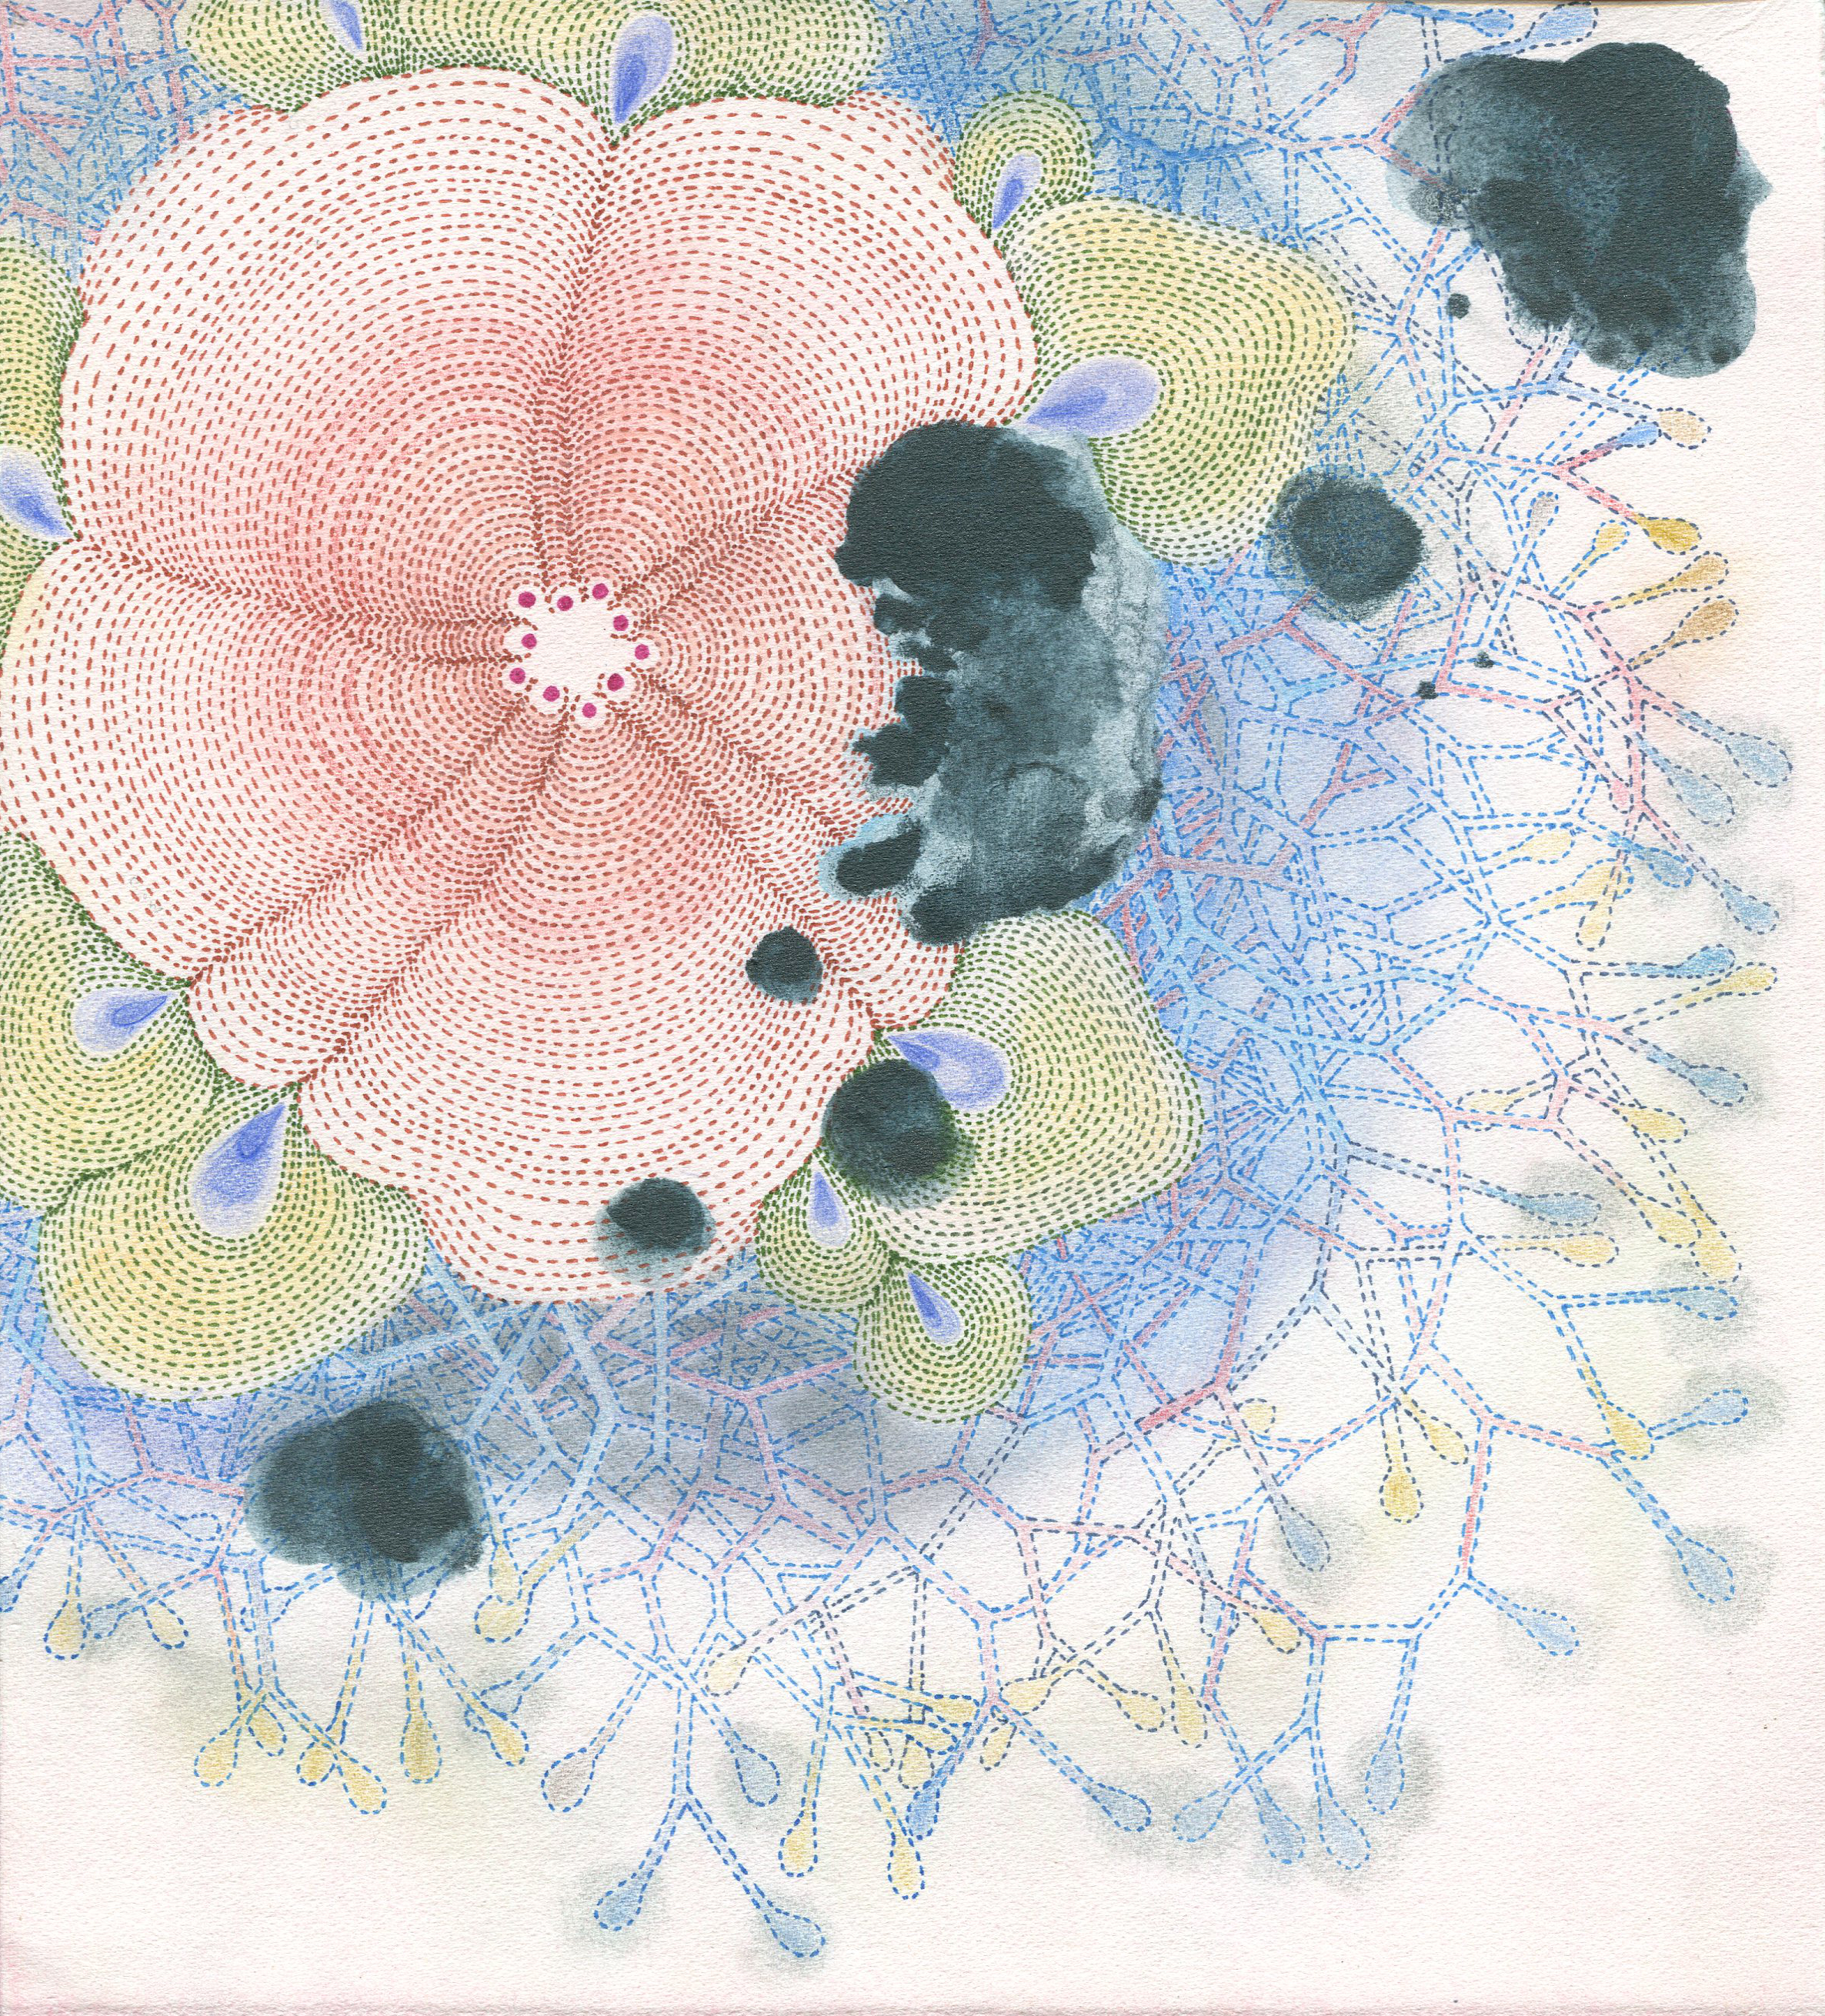 Hyphae Dark Spots. Ink, colored pencil and graphite on paper, 8 x 9 inches.